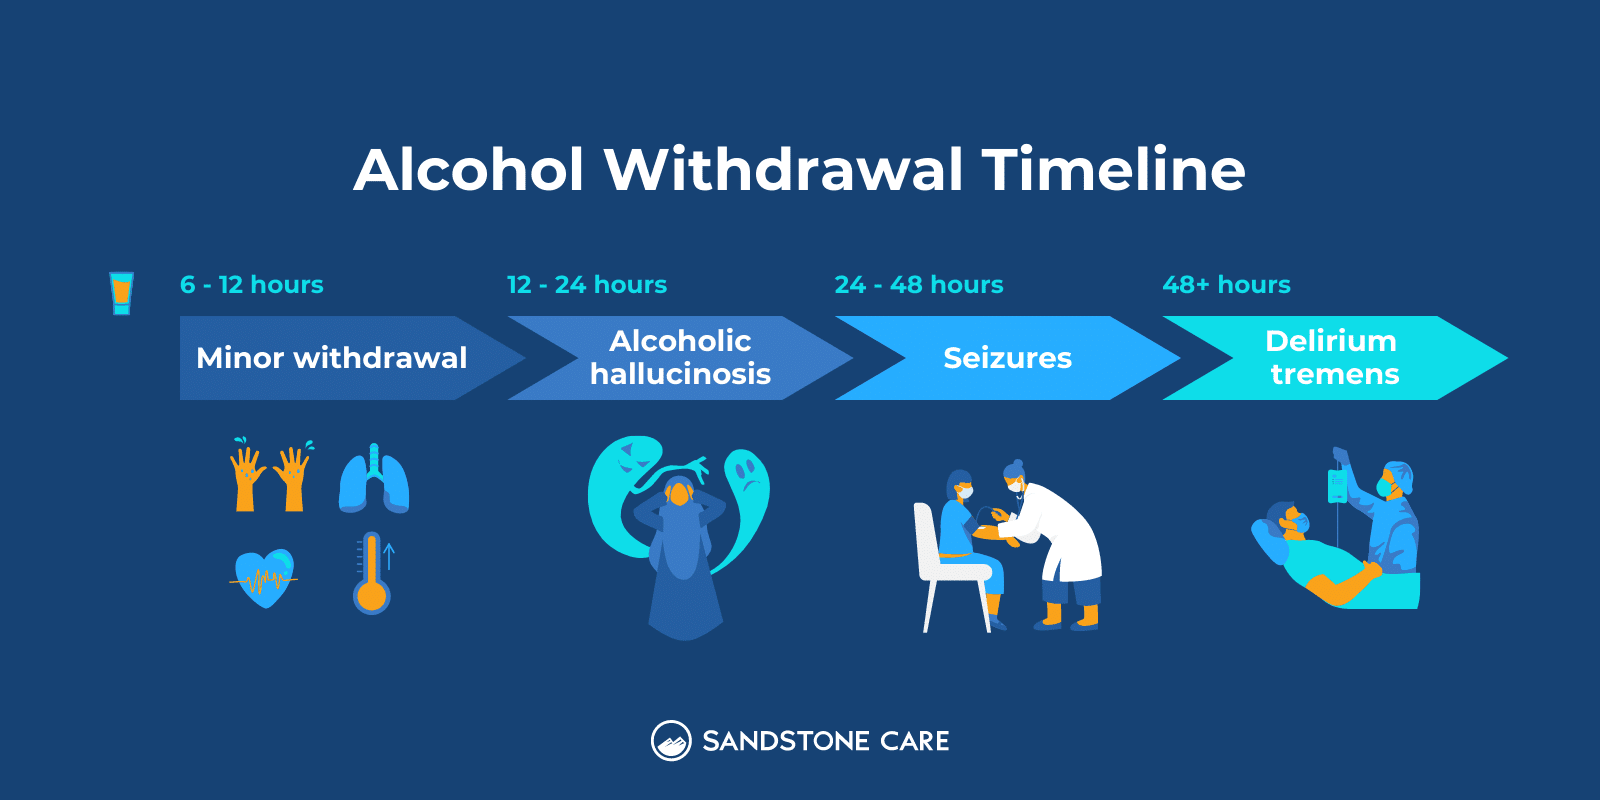 Alcohol withdrawal timeline text on top of different withdrawal stages and time after first alcohol with relevant graphics and icons